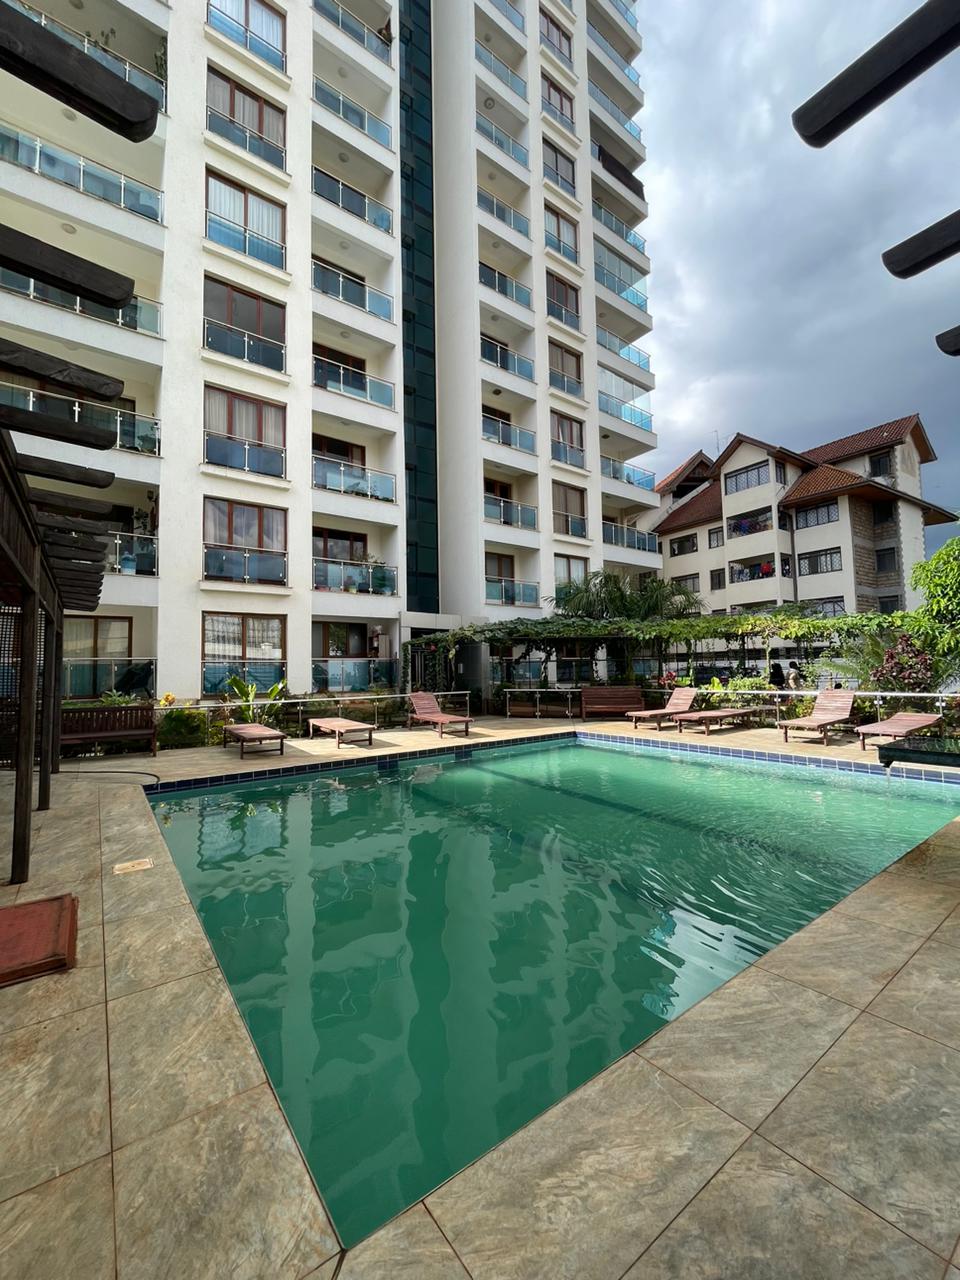 Luxurious and exclusive Lifestyle in Kileleshwa with this stunning Turkish-designed 5 Bedroom Duplex Penthouse For Sale.Asking price: 85,312,500. Musilli Homes.